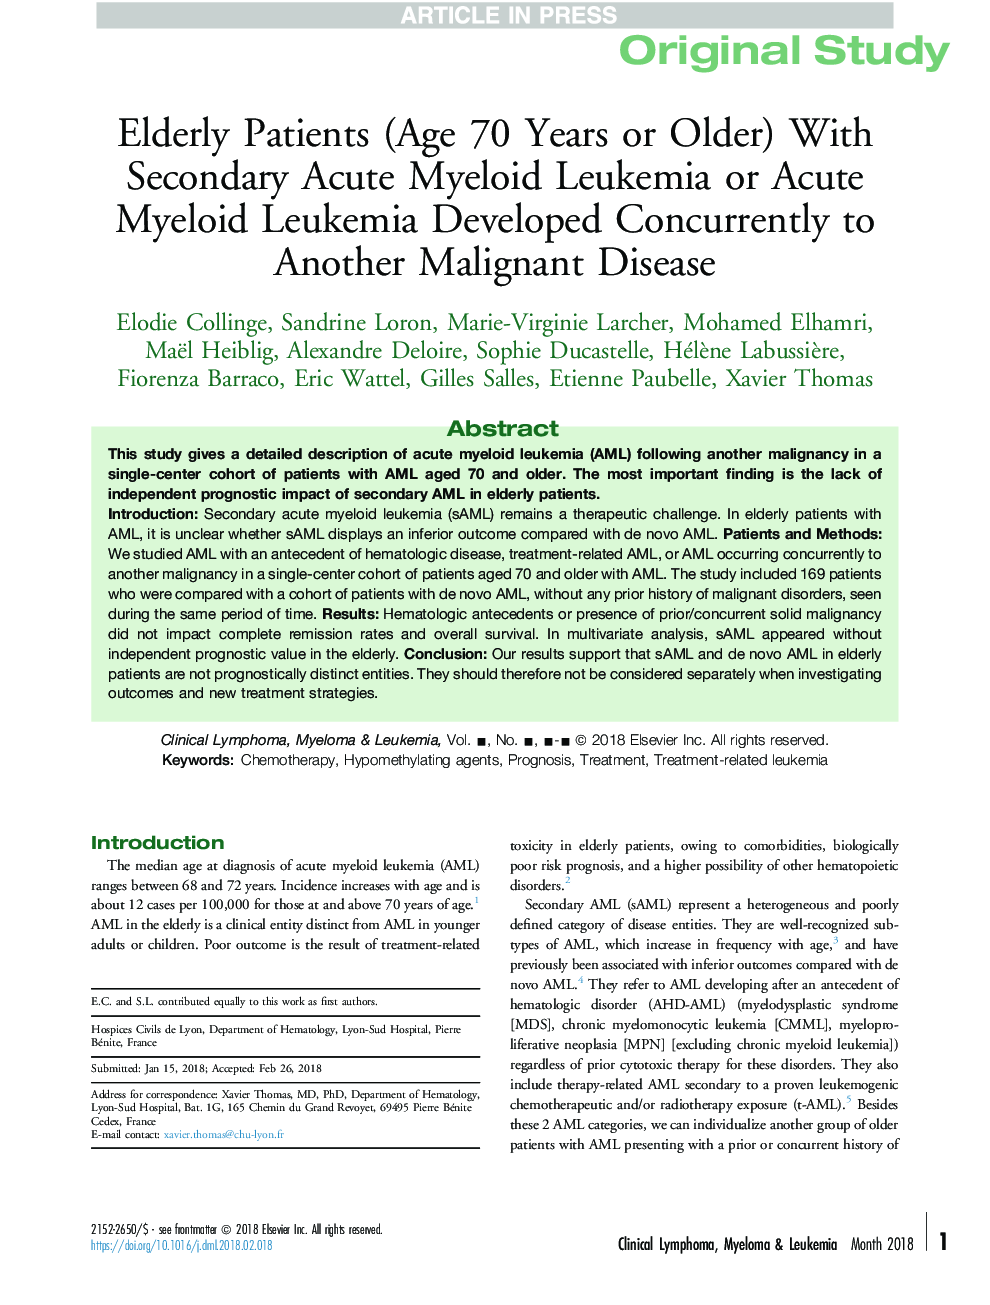 Elderly Patients (Age 70 Years or Older) With Secondary Acute Myeloid Leukemia or Acute Myeloid Leukemia Developed Concurrently to Another Malignant Disease